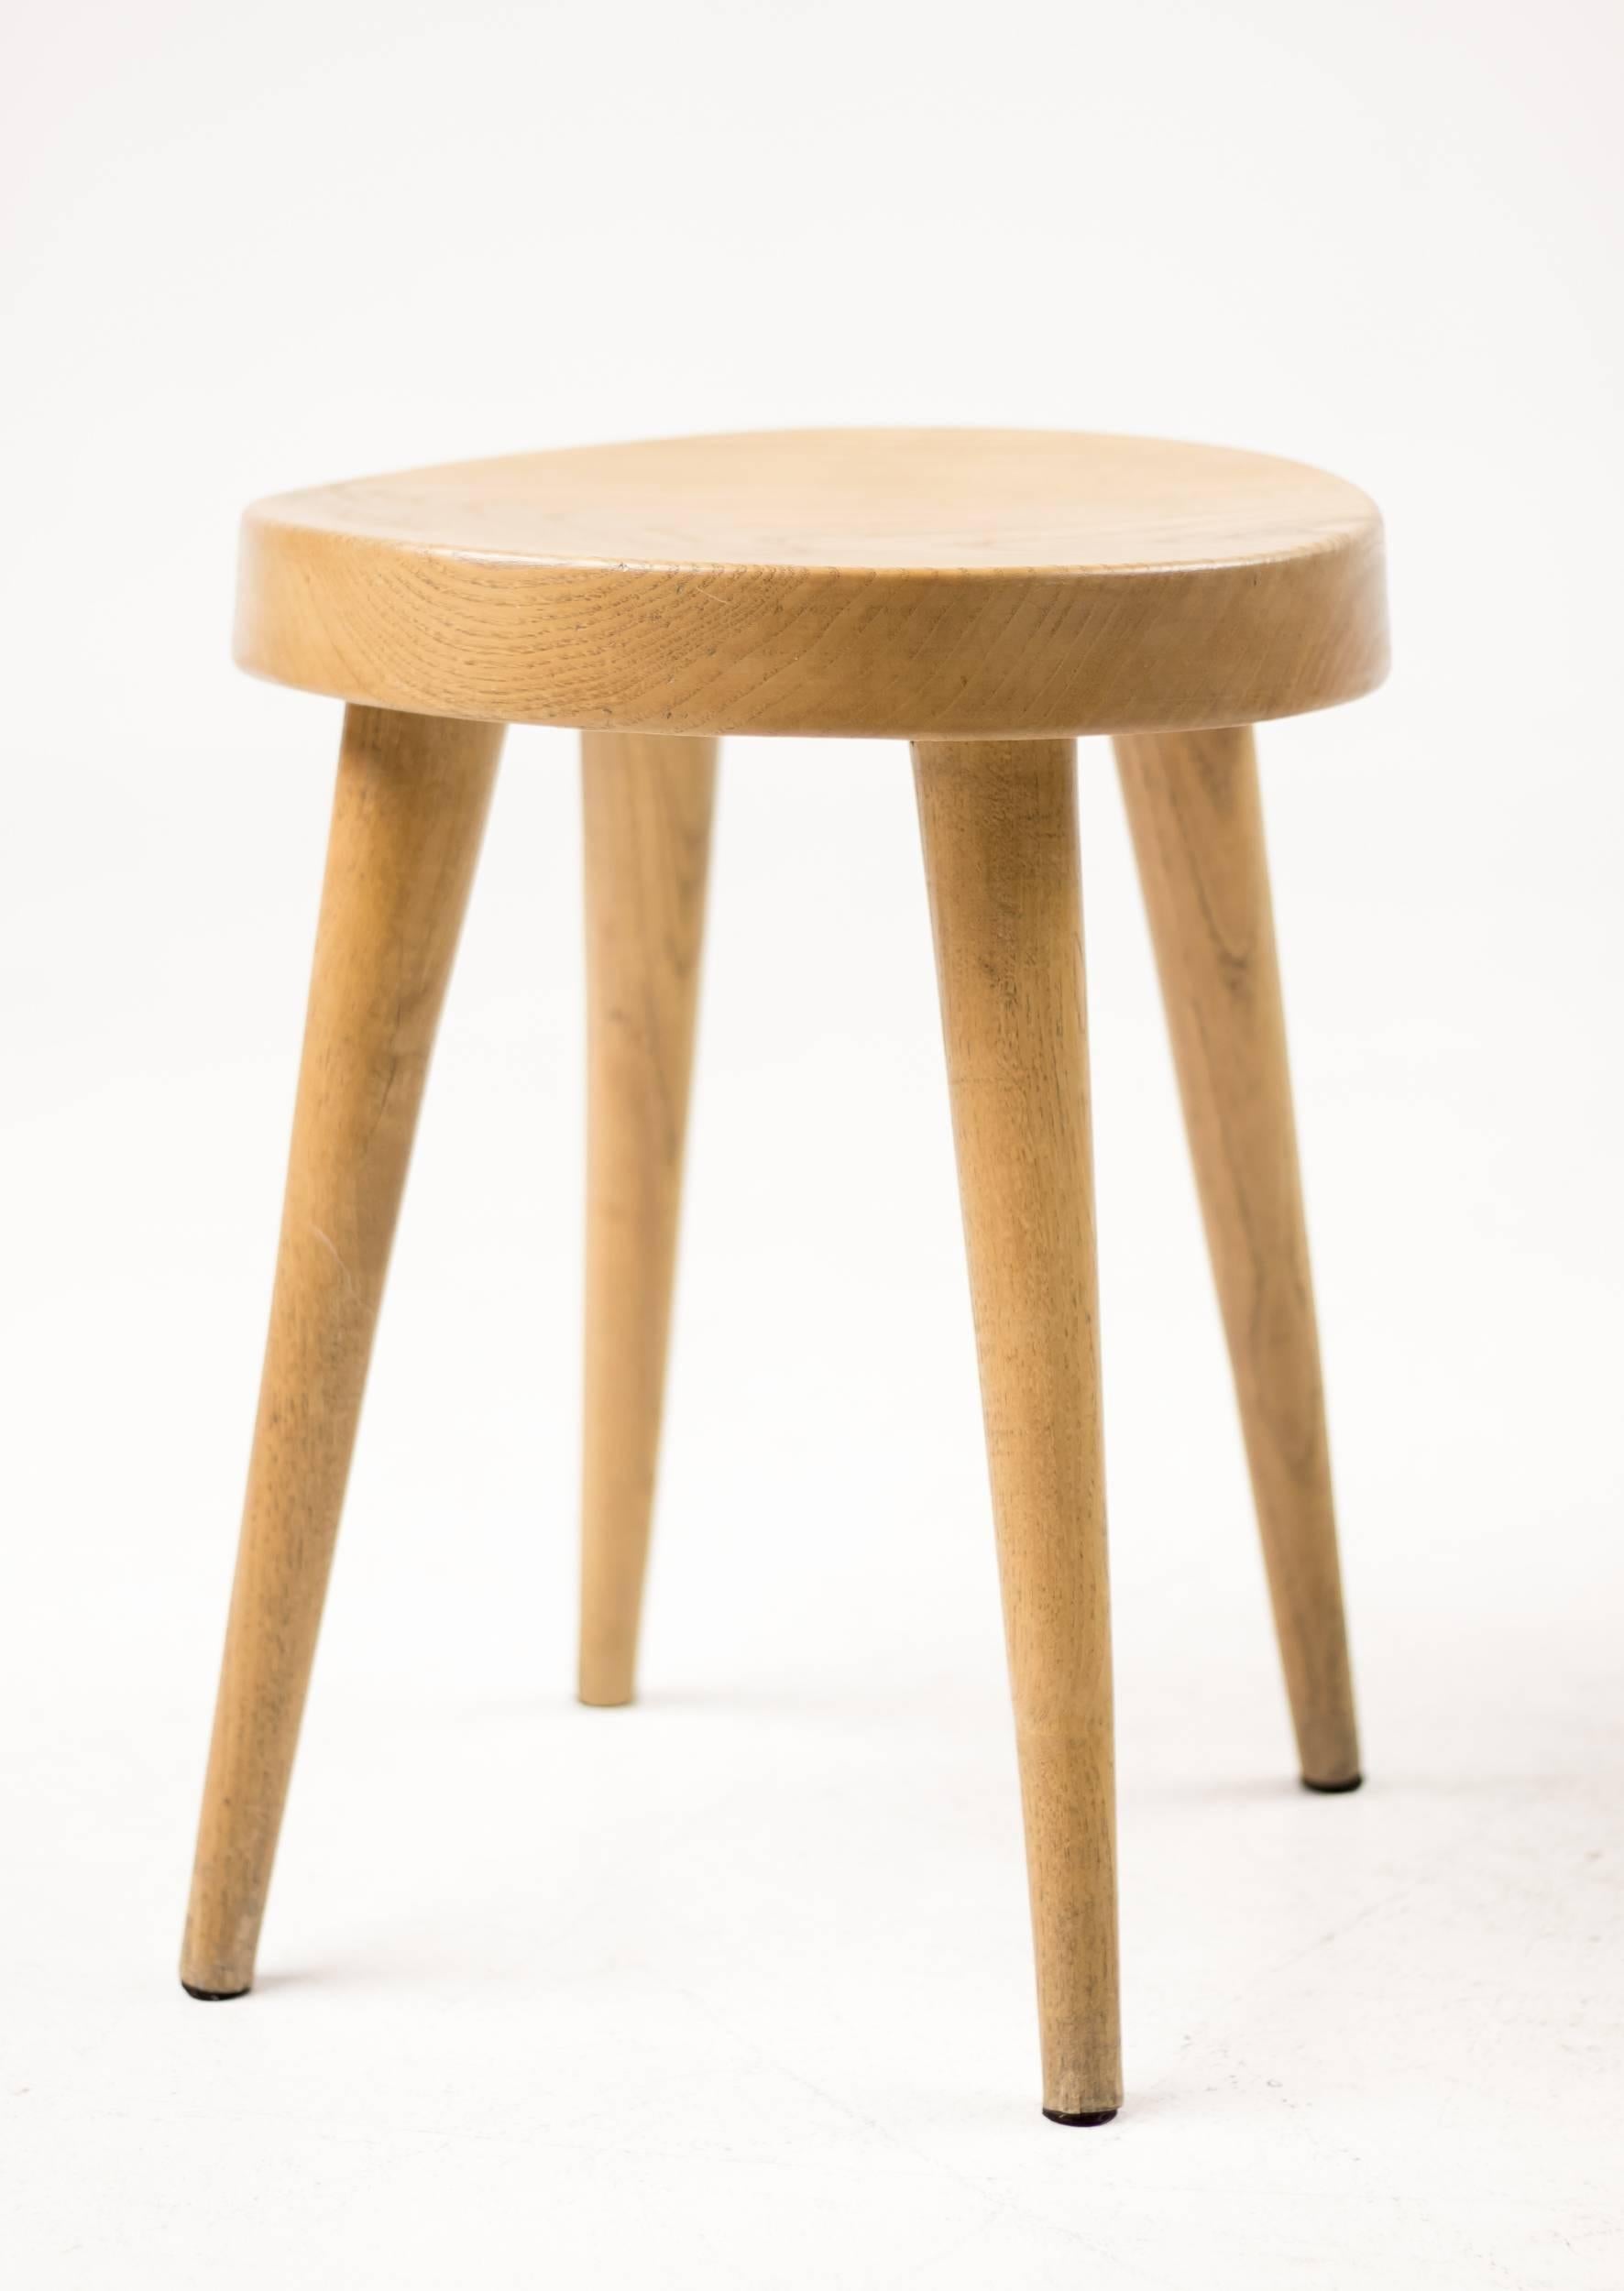 Pair of Four-Leg Stools by Charlotte Perriand for Steph Simon In Excellent Condition For Sale In Dronten, NL